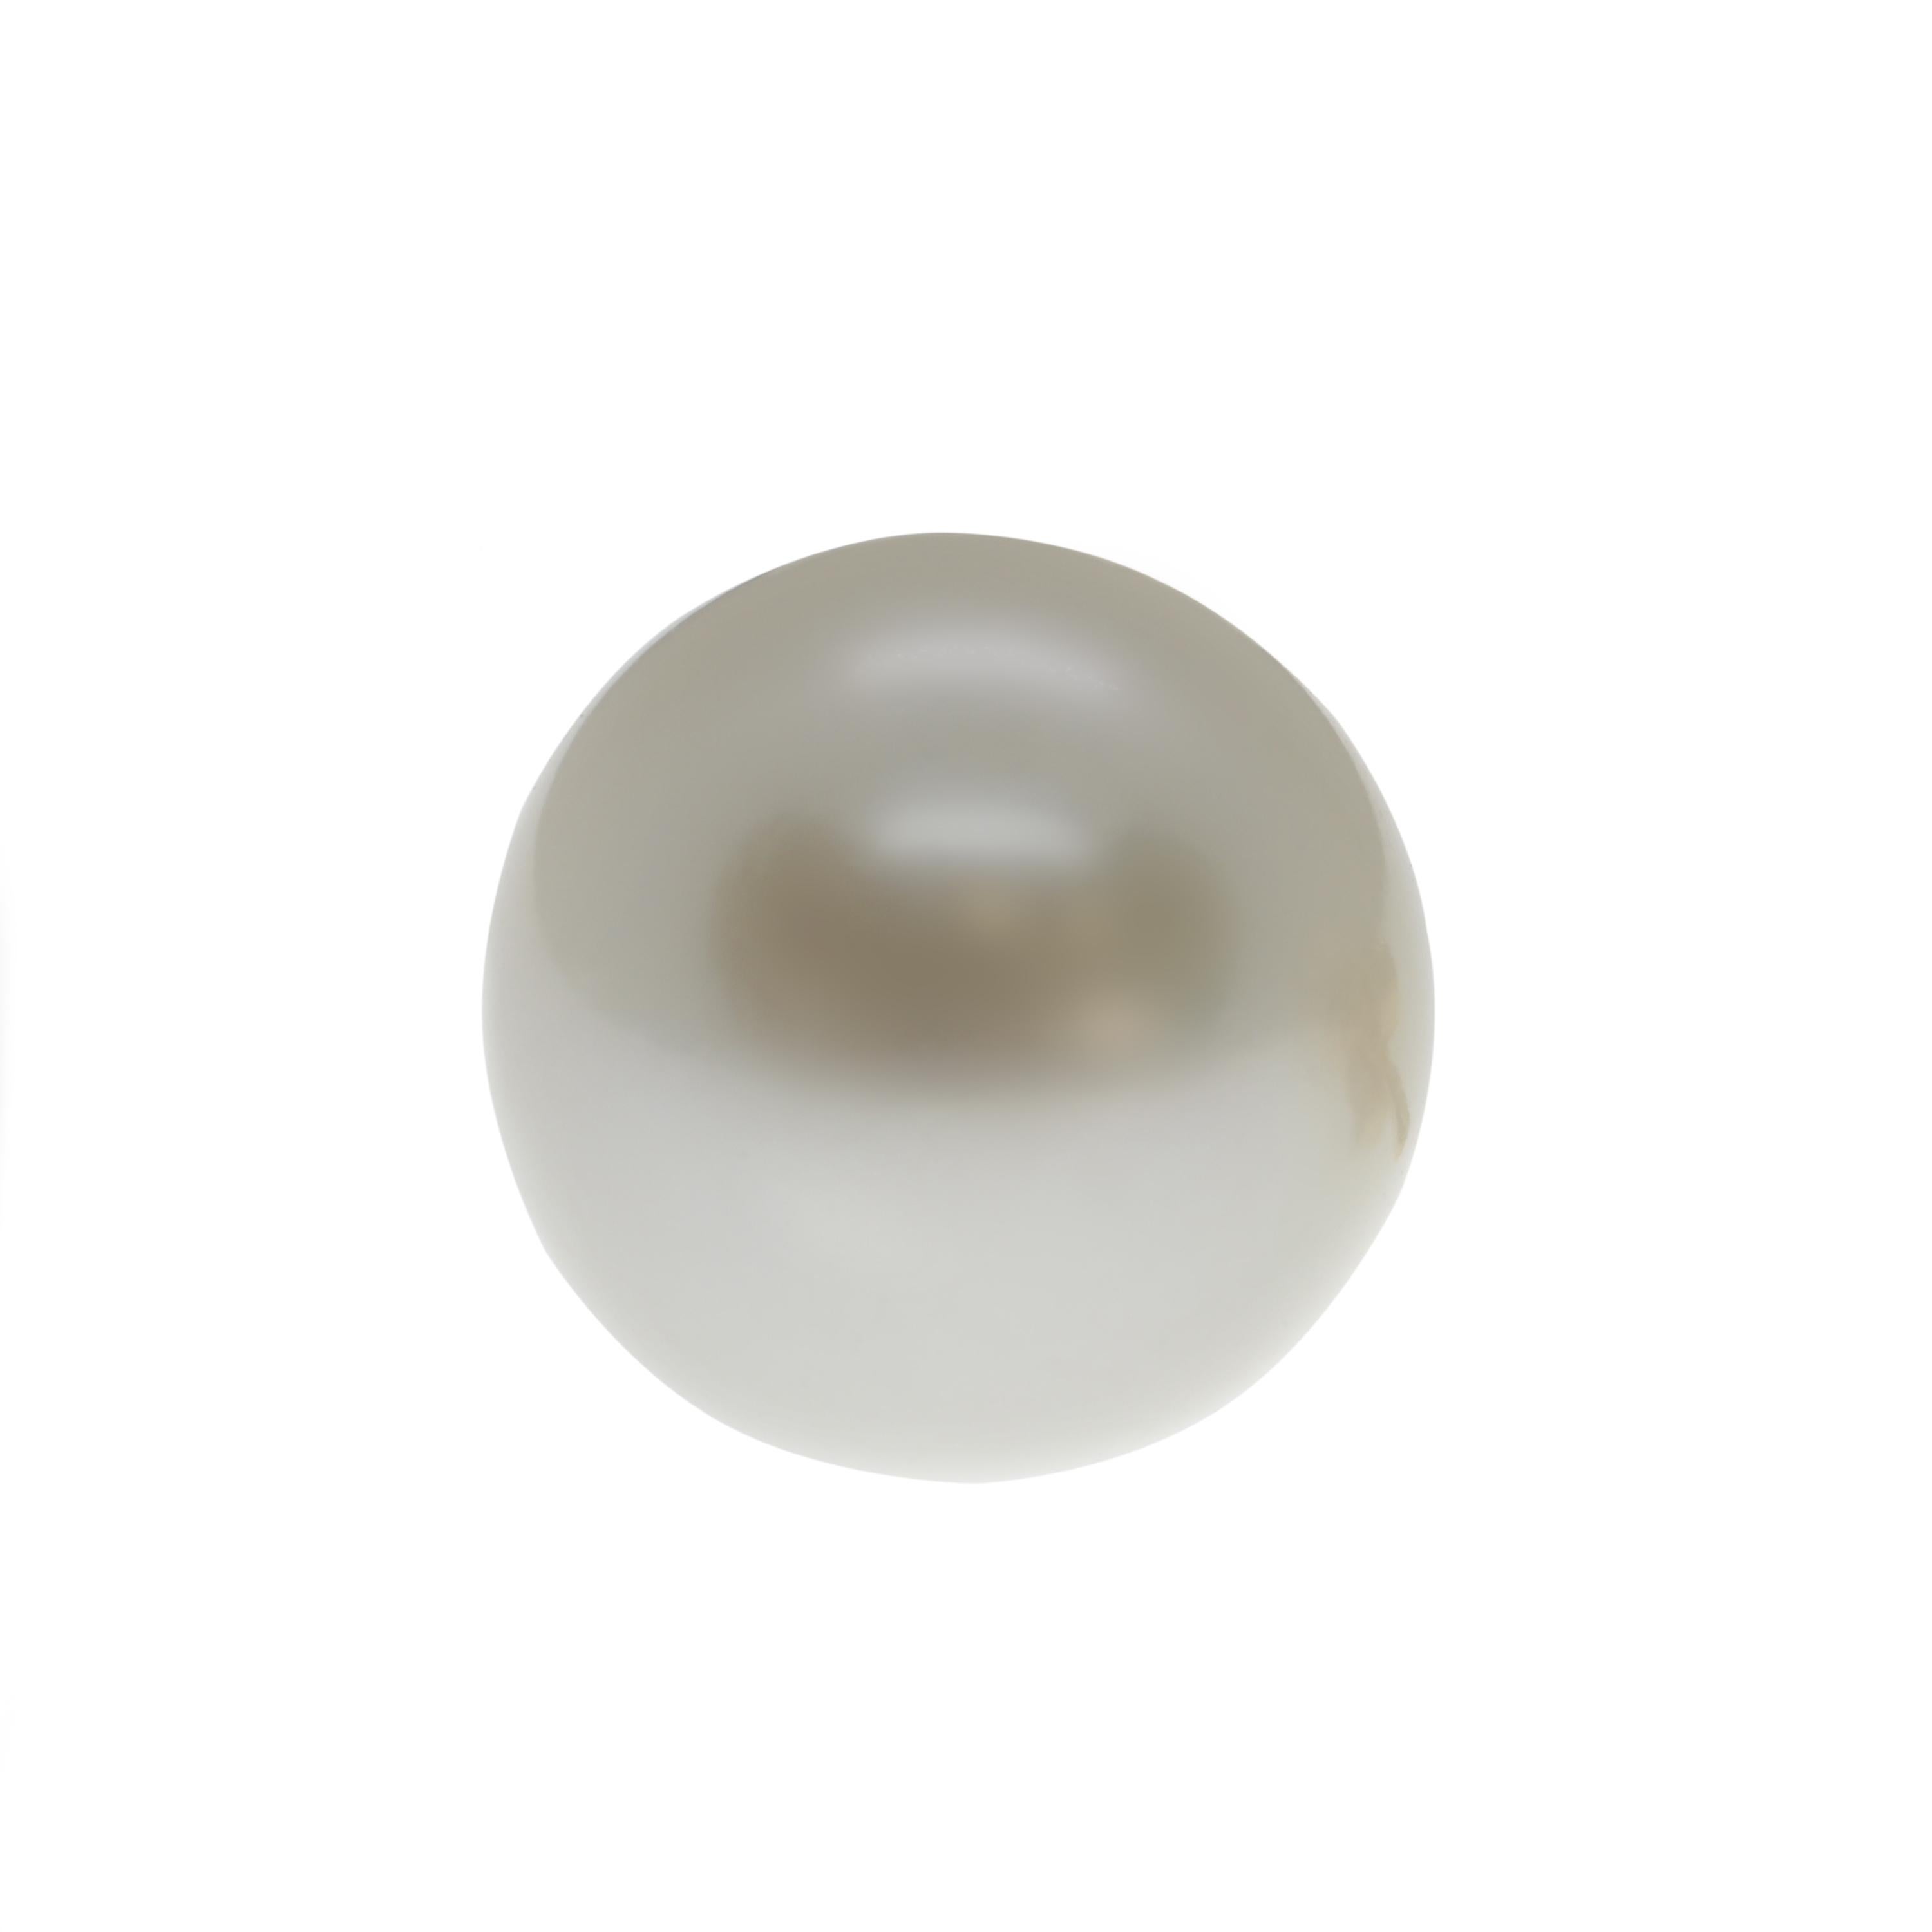 The most classic earrings: a pair of single beautiful cultured pearls with 18-karat yellow gold postbacks.

Expertly handmade and divinely feminine, they match any one of our stunning pearl cocktail rings and necklaces, including the one that